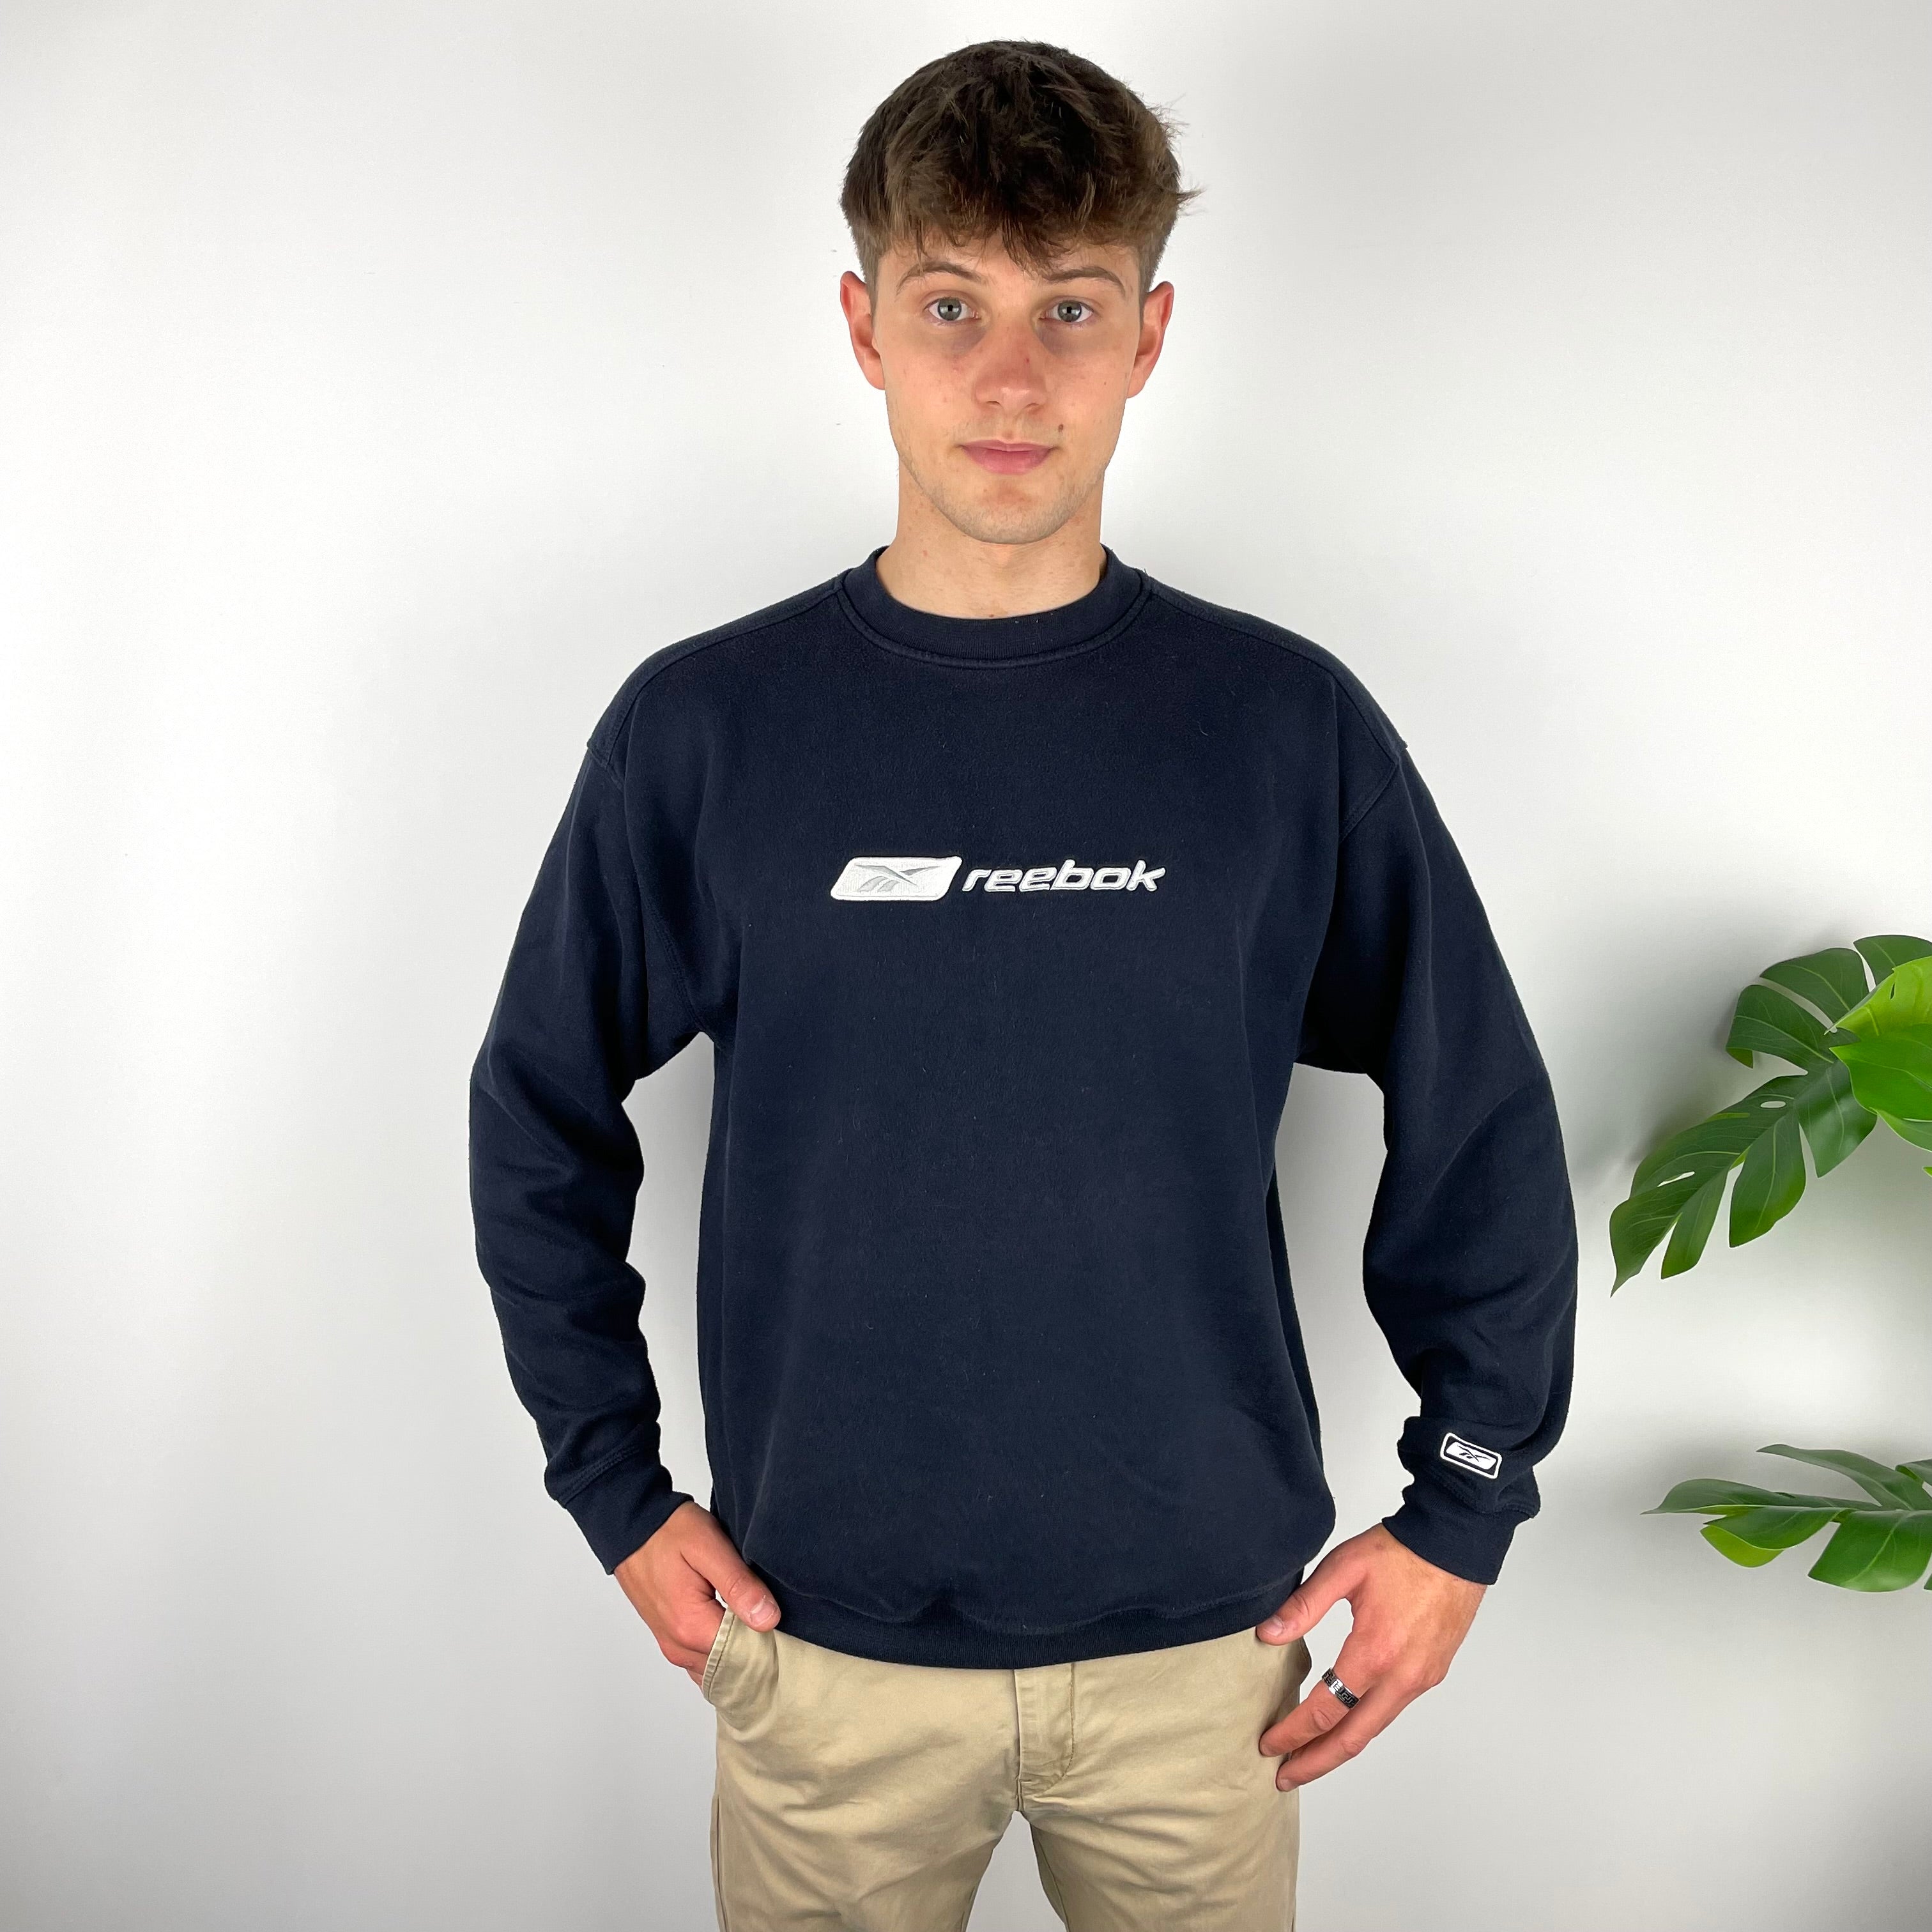 Reebok RARE Navy Embroidered Spell Out Sweatshirt (M)